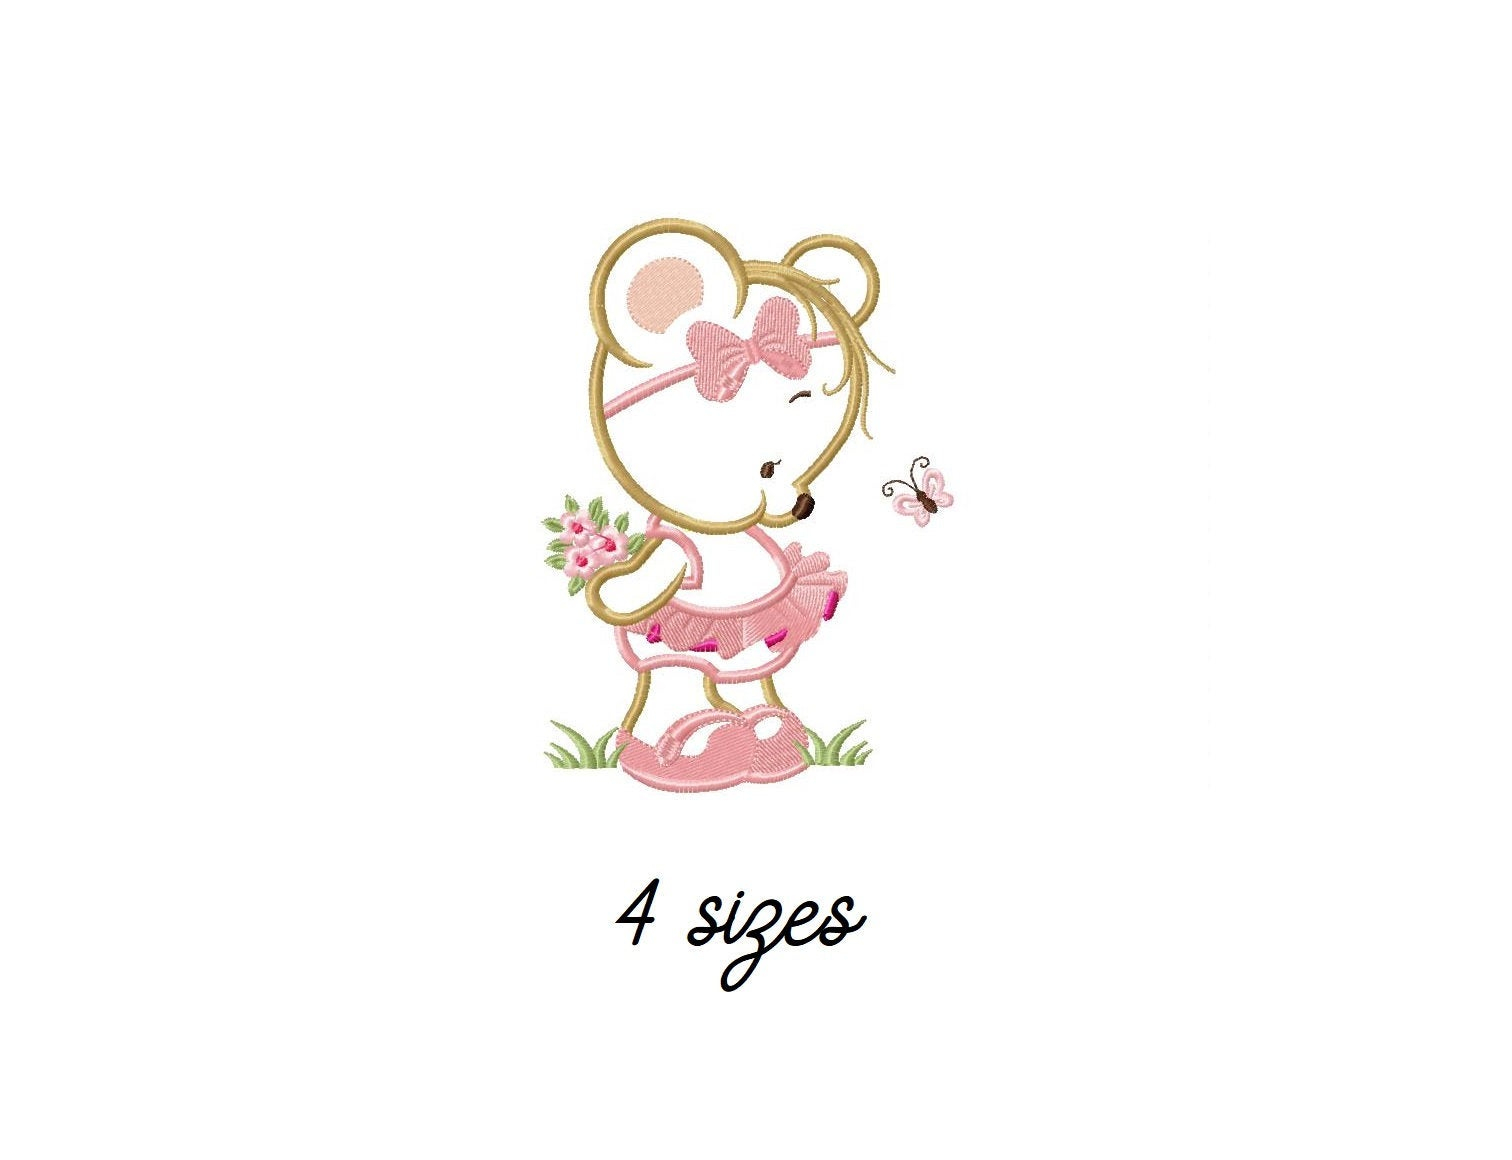 Baby Embroidery Patterns Cute Bear Girl Embroidery Designs Girl Embroidery Design Machine Bear Embroidery Pattern File Instant Download Ba Embroidery Ba Design